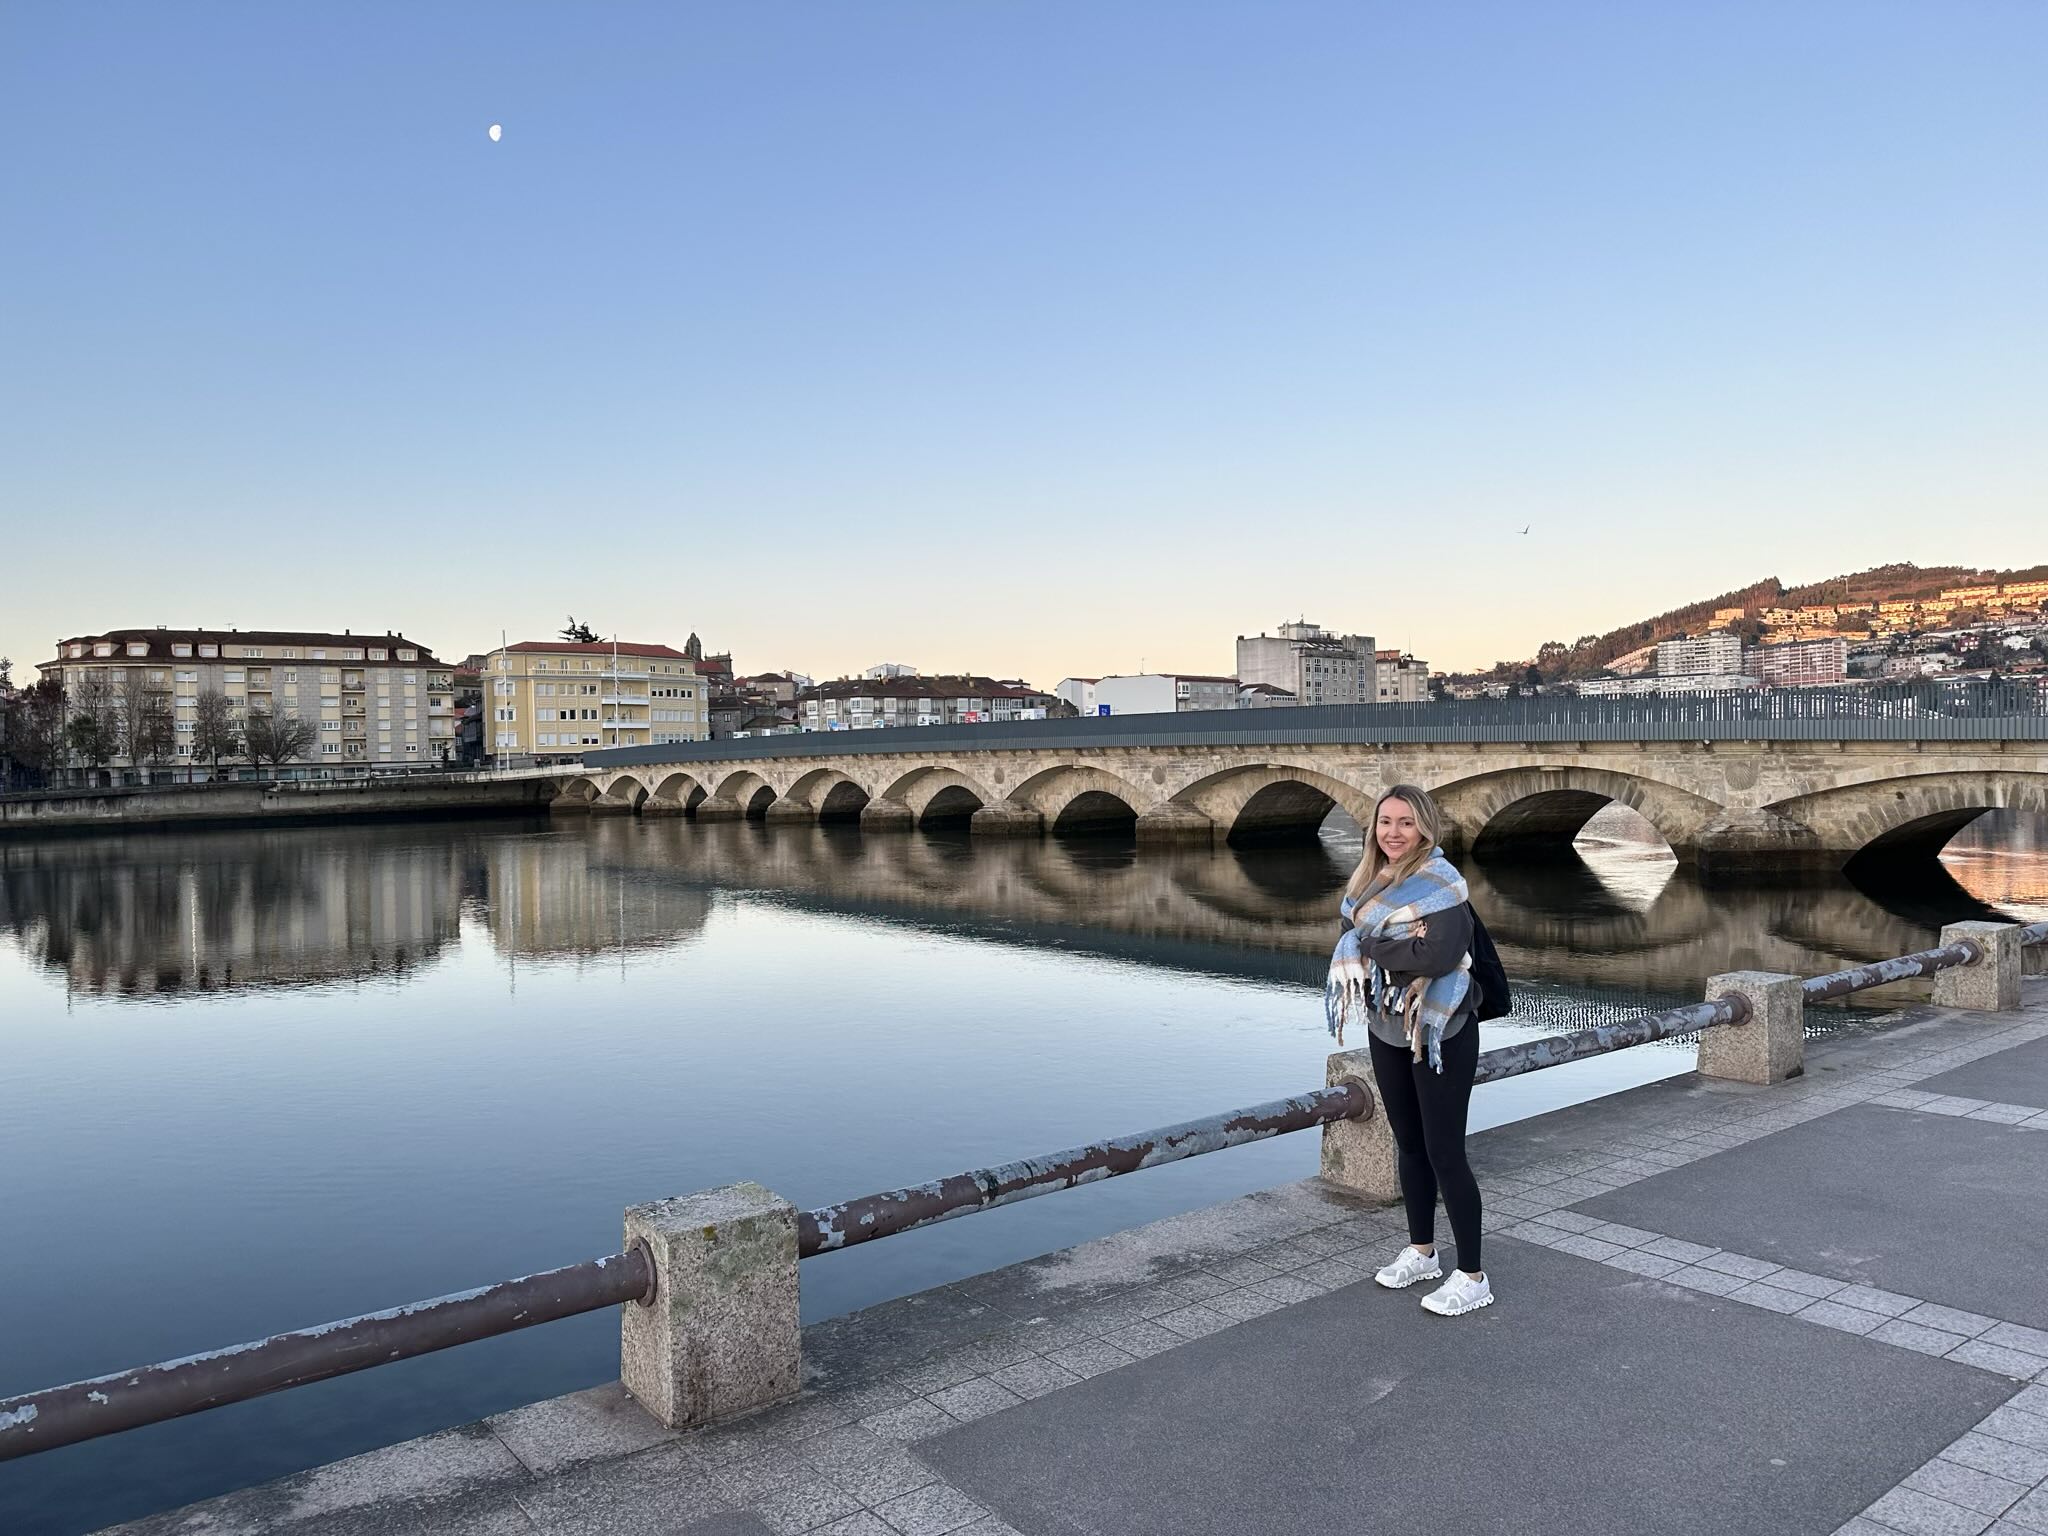 We started our camino in Pontevedra not far from the Burgos Bridge pictured here. Andrea was using a blanket because it was chilly (2C) at this hour.